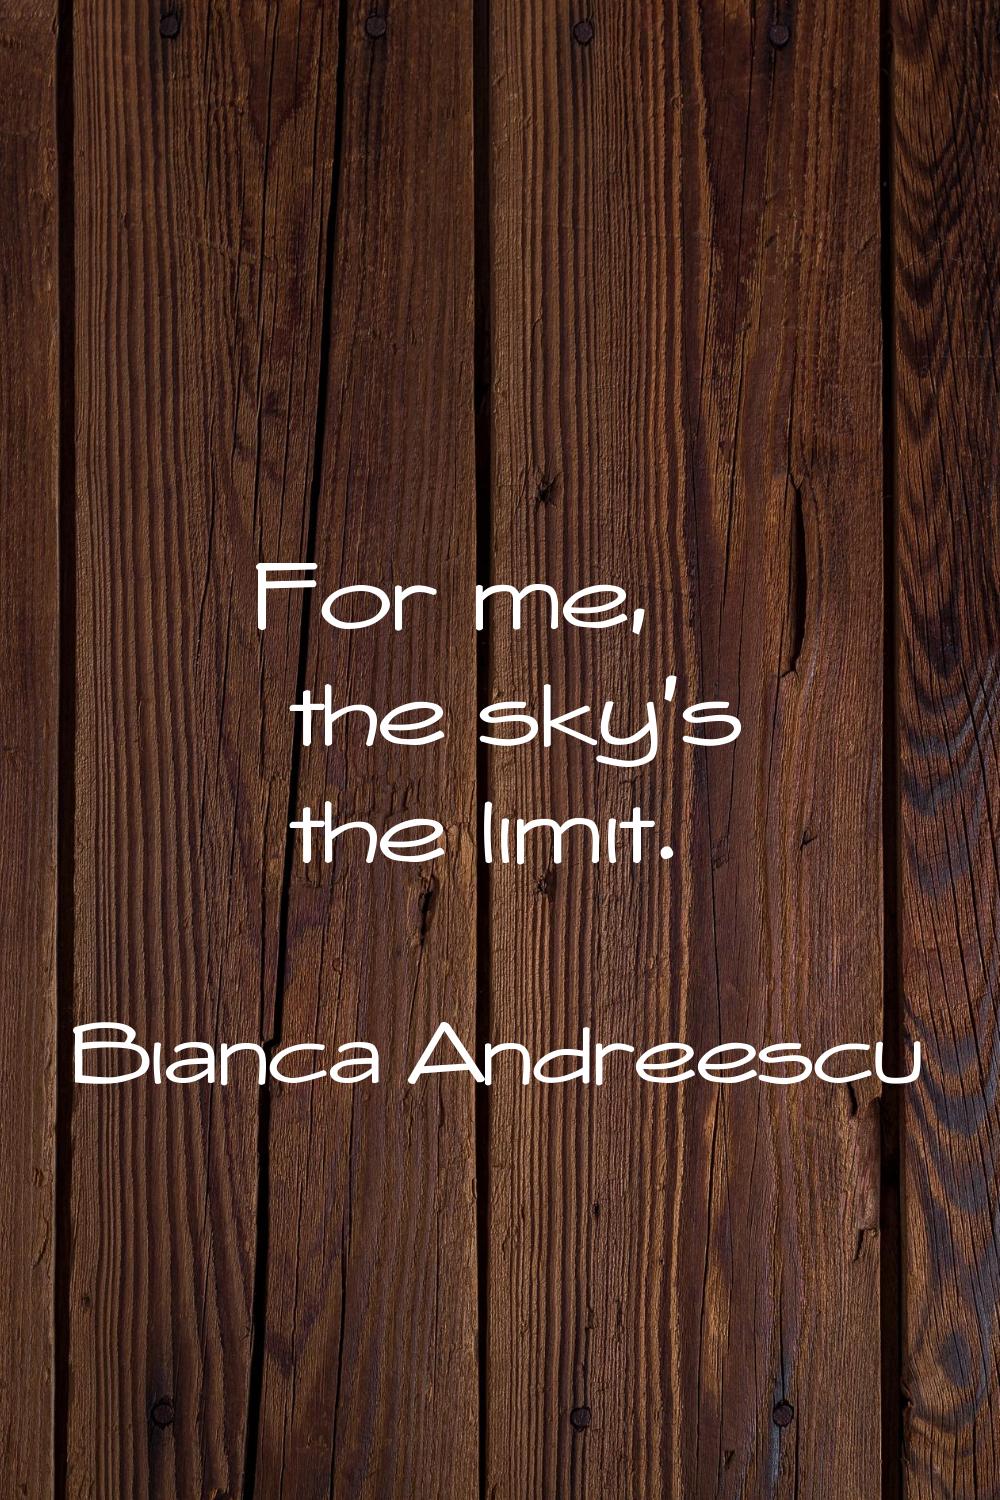 For me, the sky's the limit.